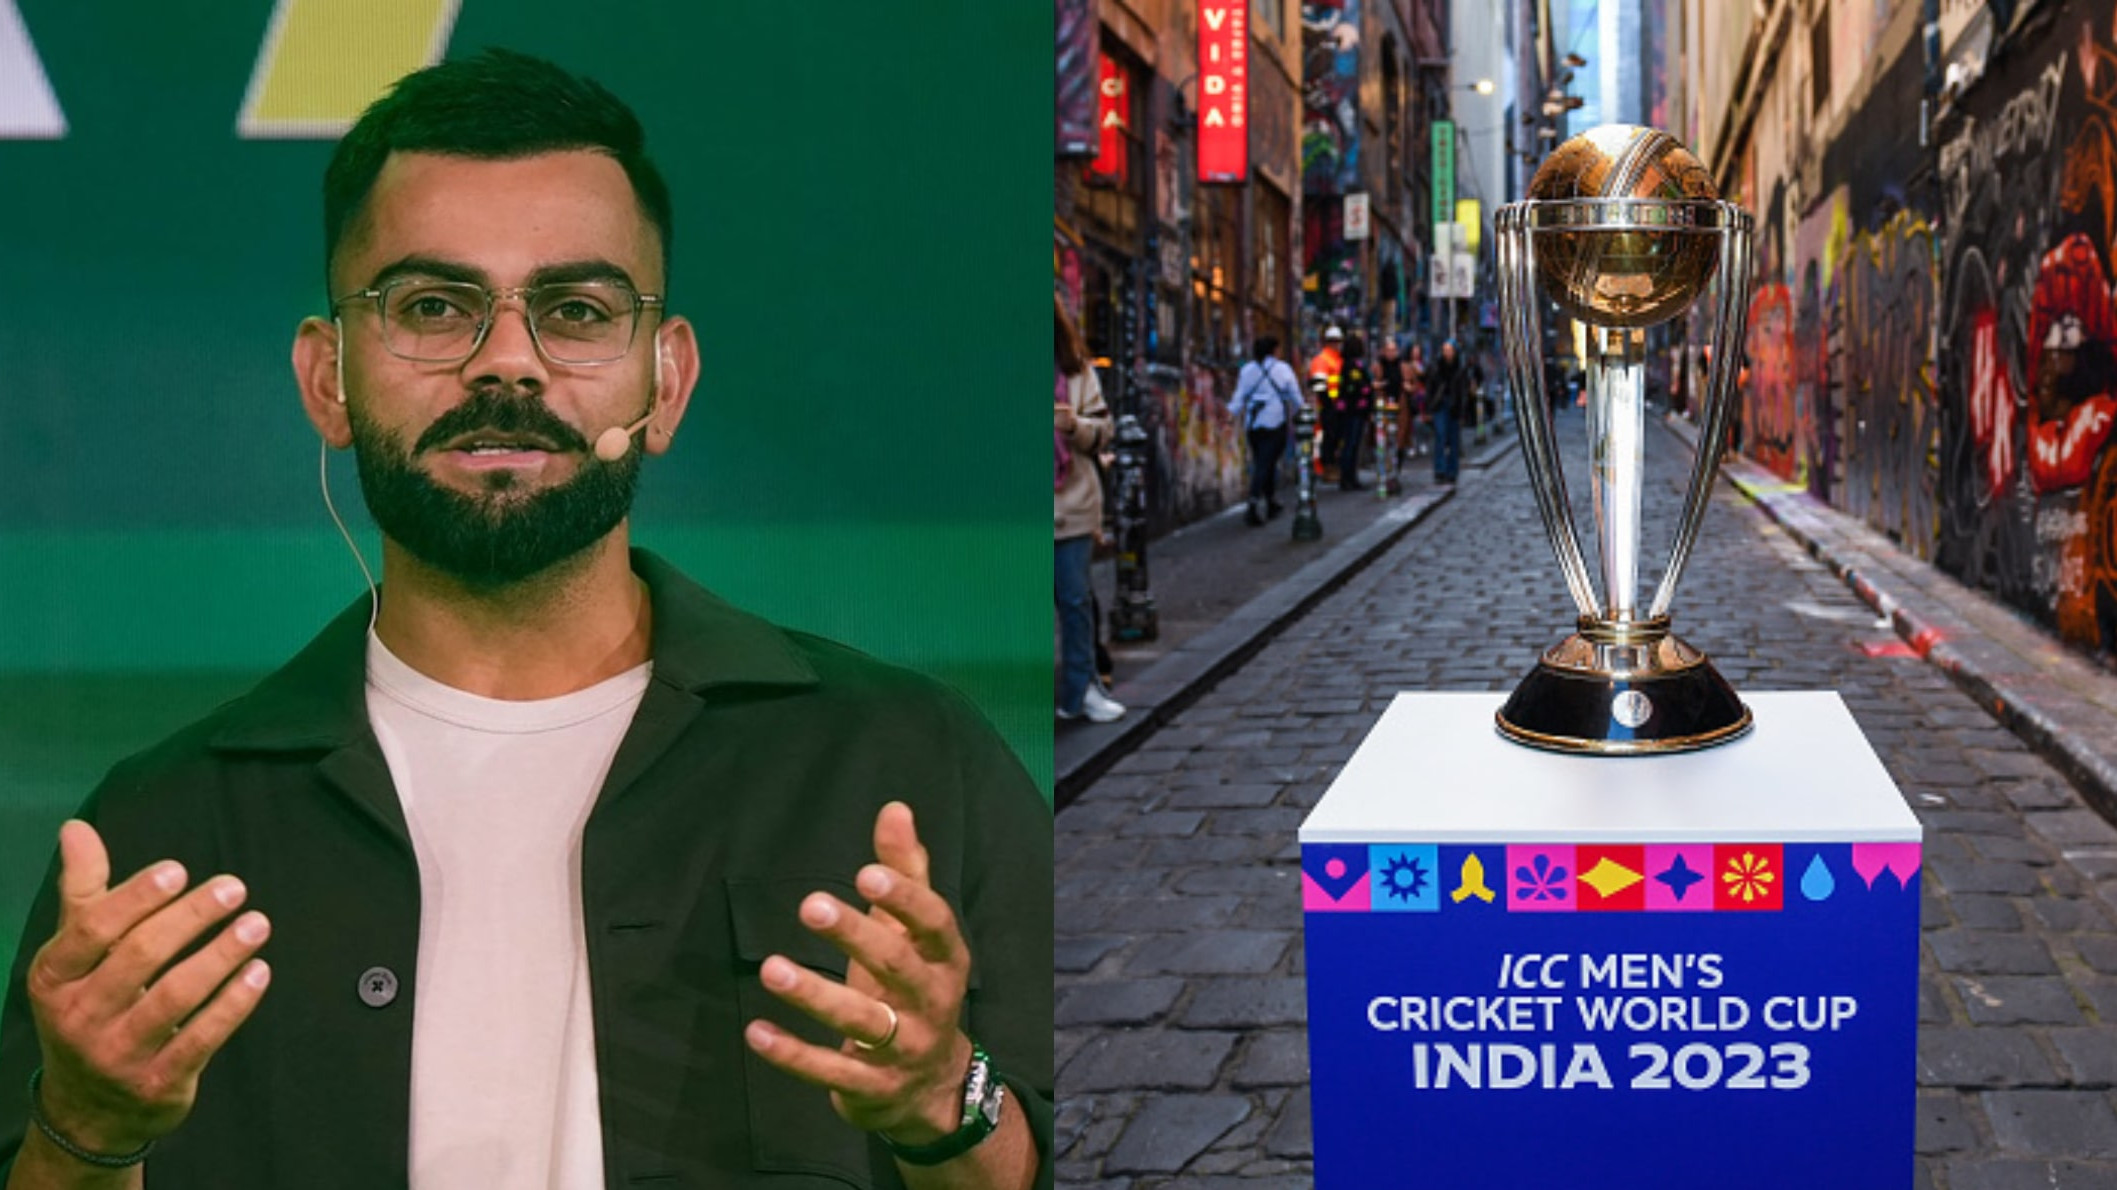 CWC 2023: “World Cup is a challenge that excites me”- Virat Kohli says players are eager to win the trophy